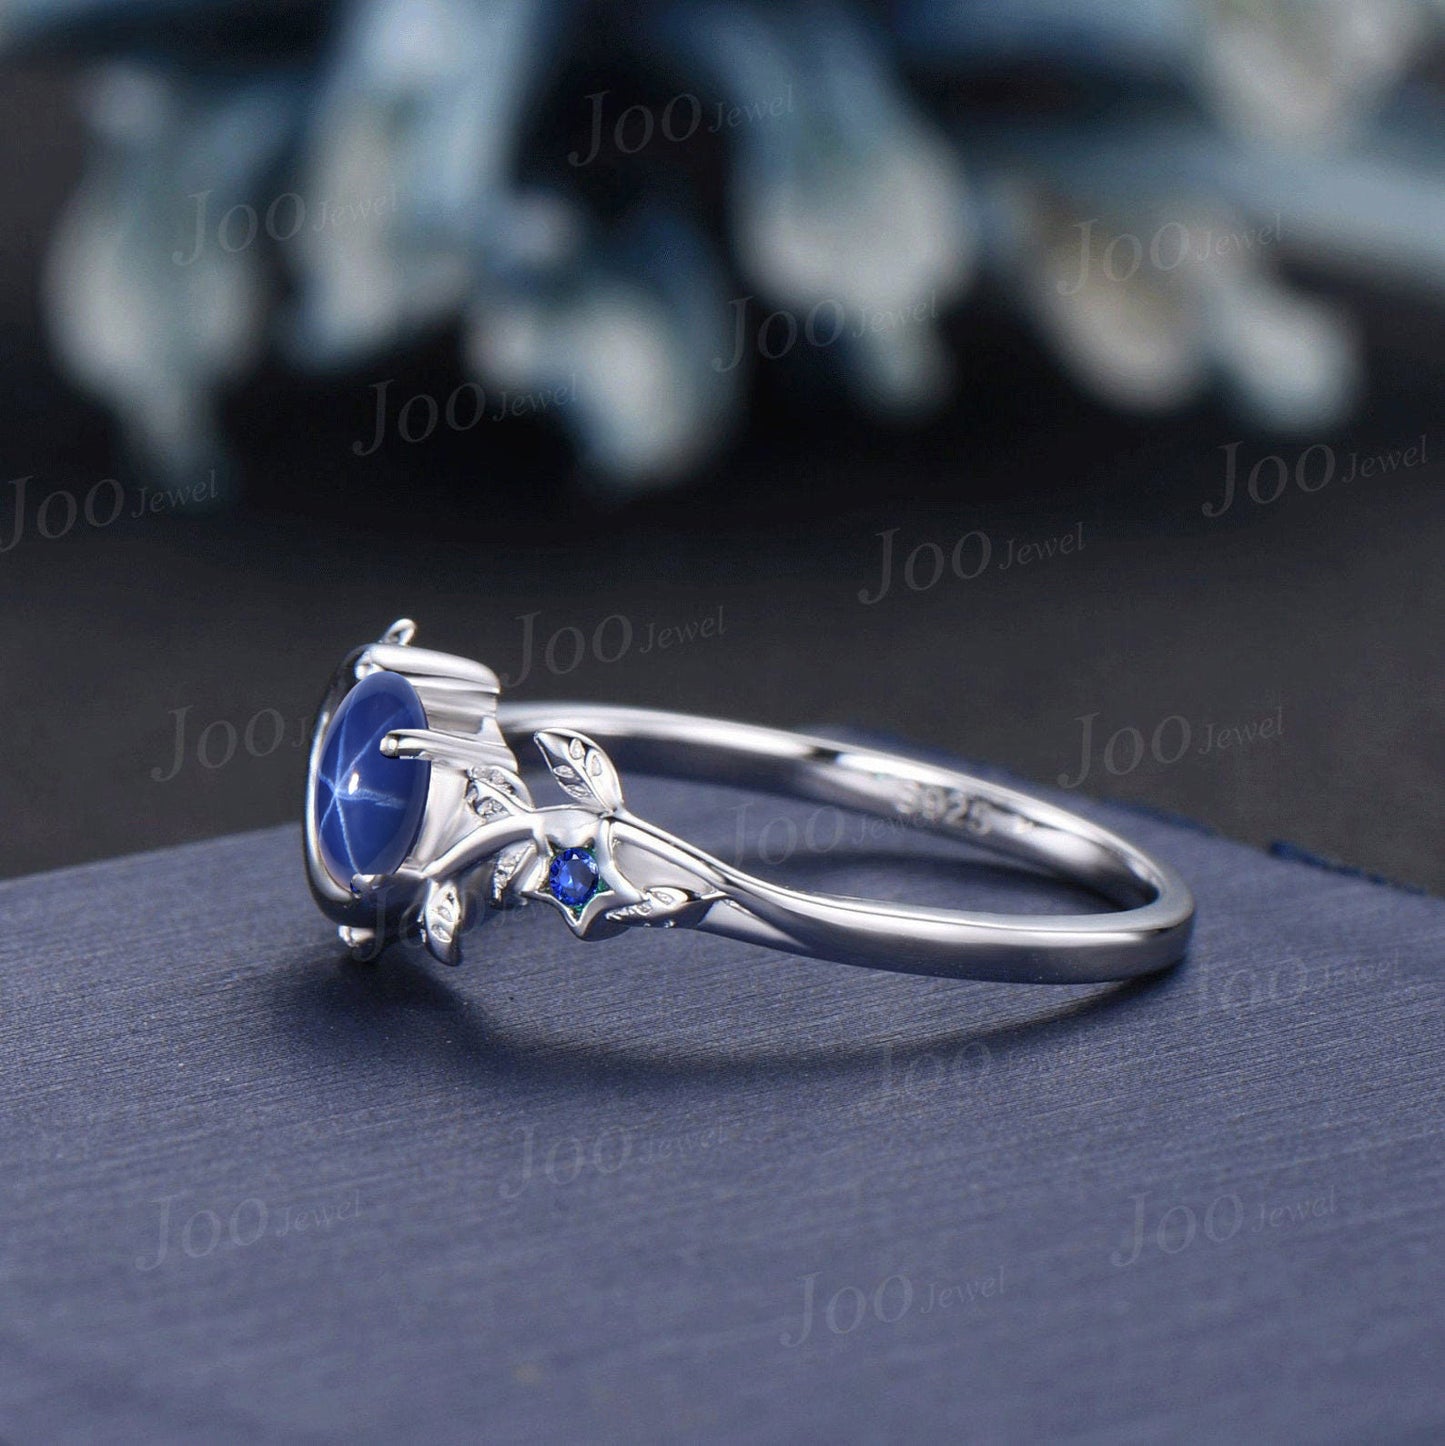 5mm Nature Inspired Round Cut Star Sapphire Moon Engagement Ring Blue Sapphire Wedding Ring Cluster Star Blue Ring Unique Personalized Gifts